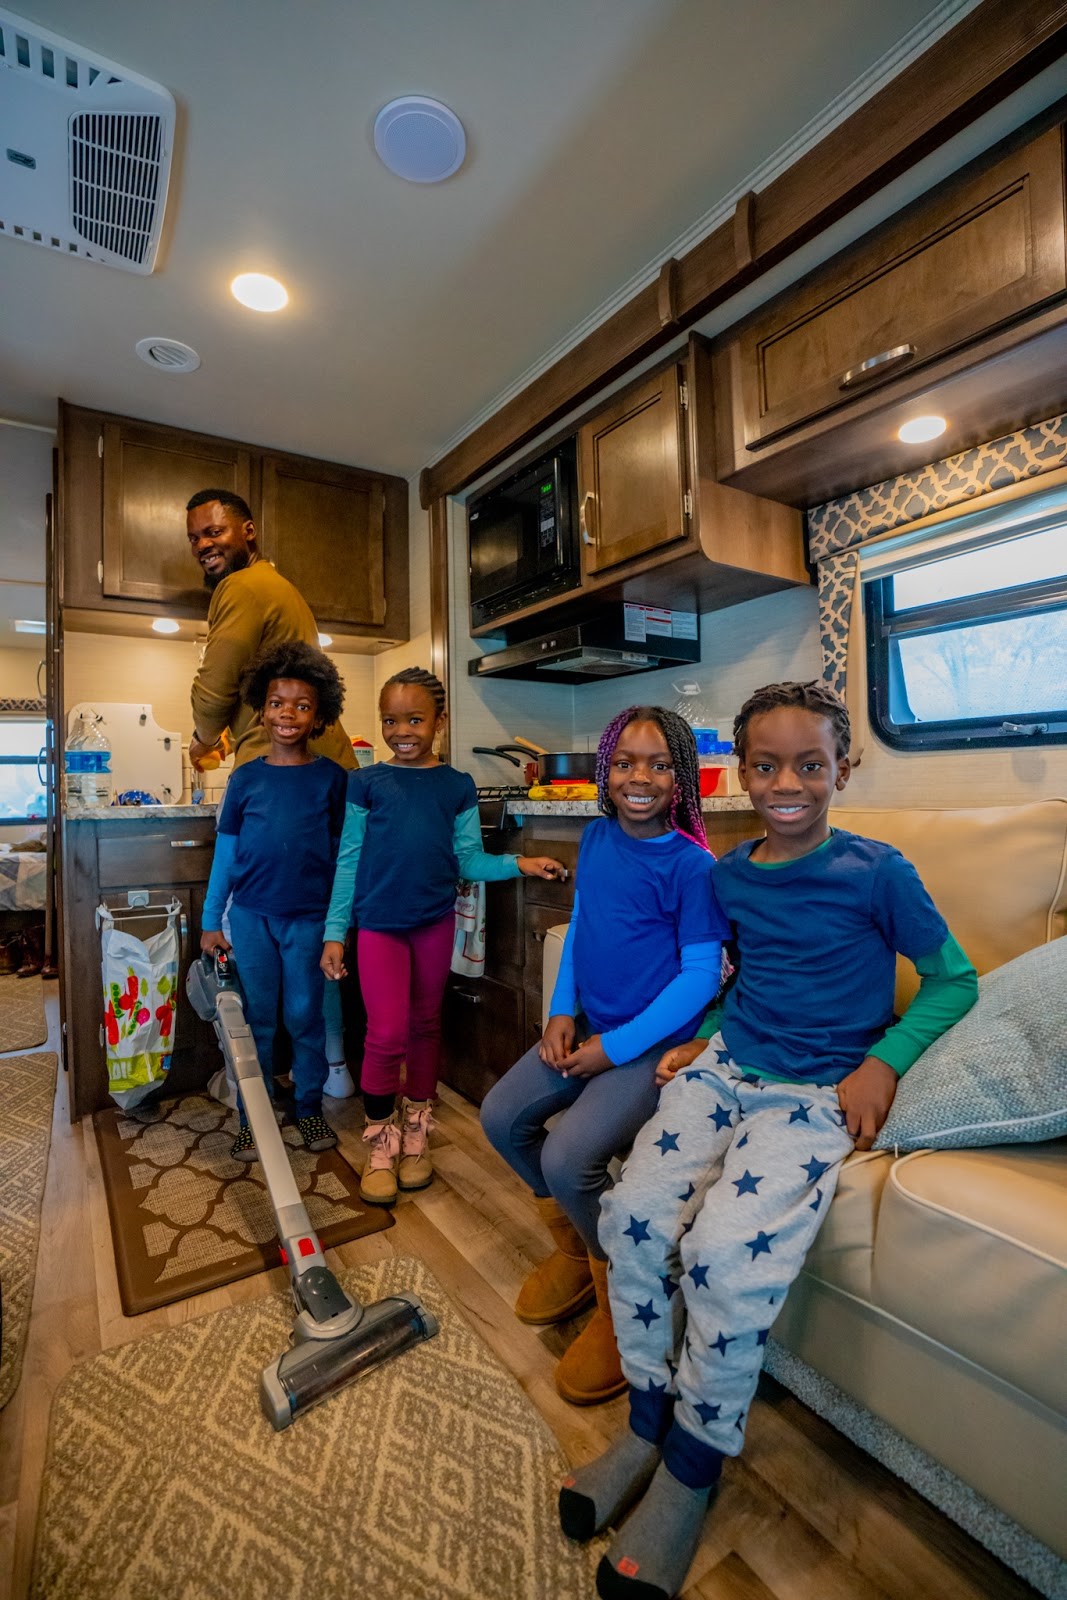 10 Life Skills Your Kids Can Learn Through RVing 4